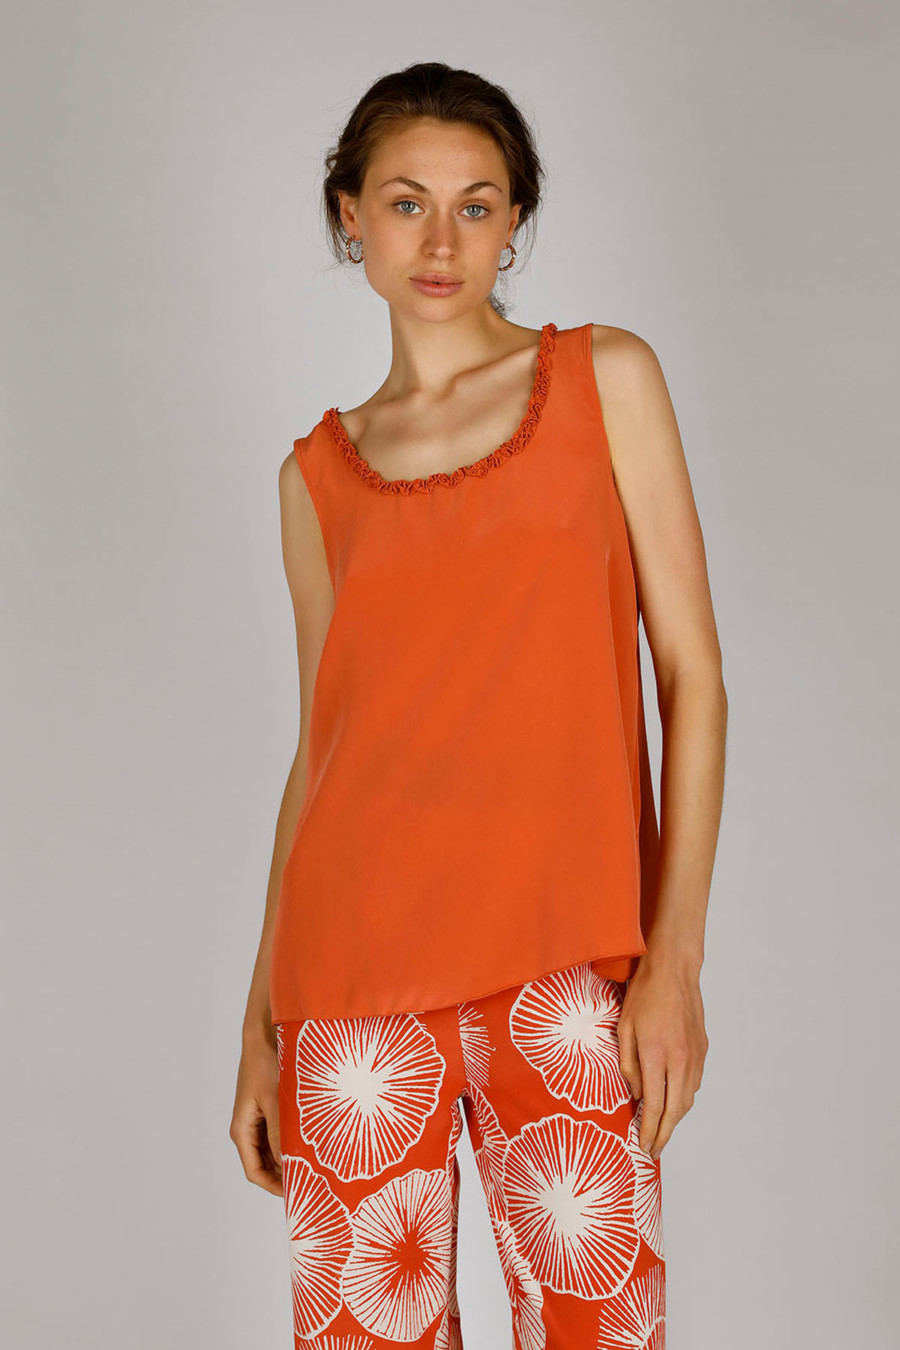 POLLY - Flowing top with ruffle details - Colour: Cayenne